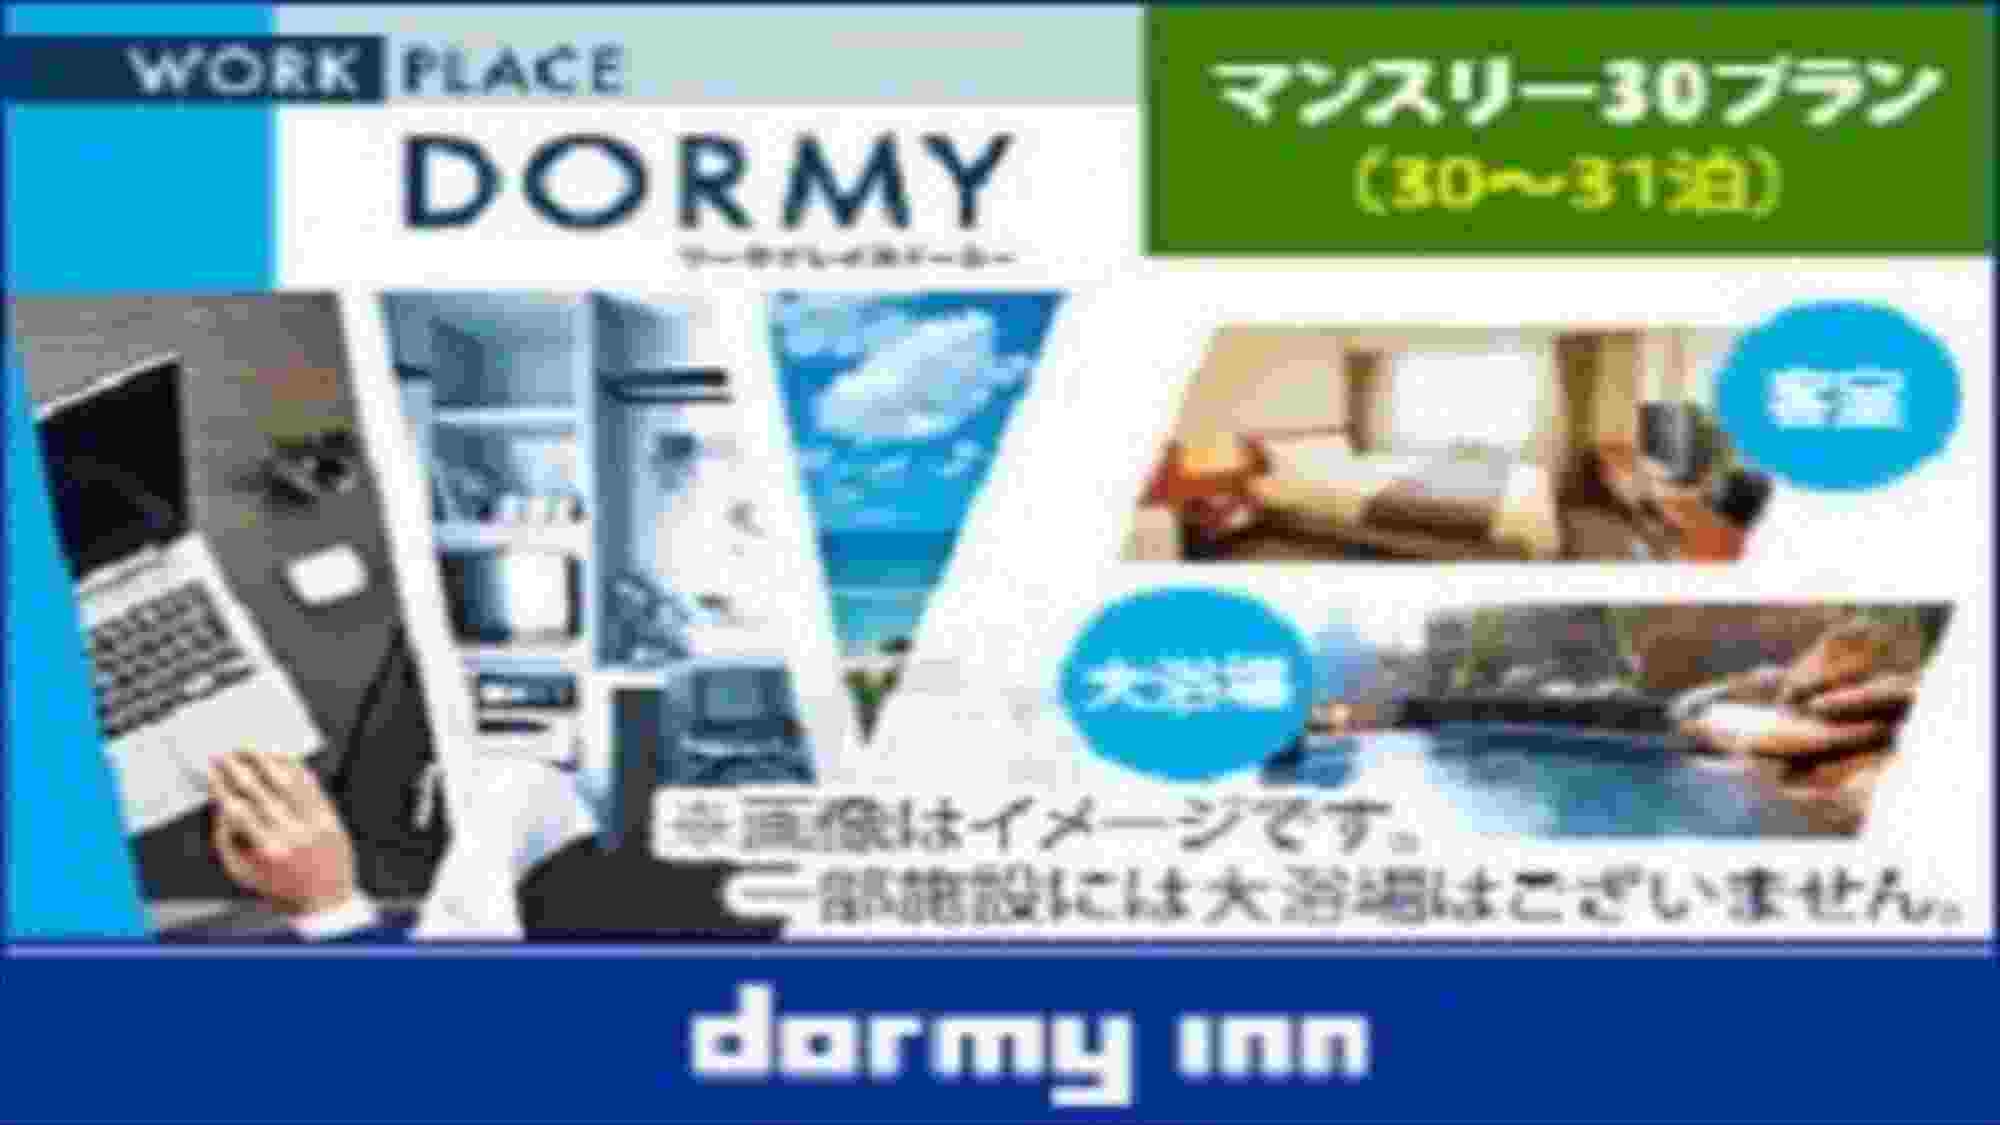 【WORK PLACE DORMY】マンスリープラン≪朝食付き≫